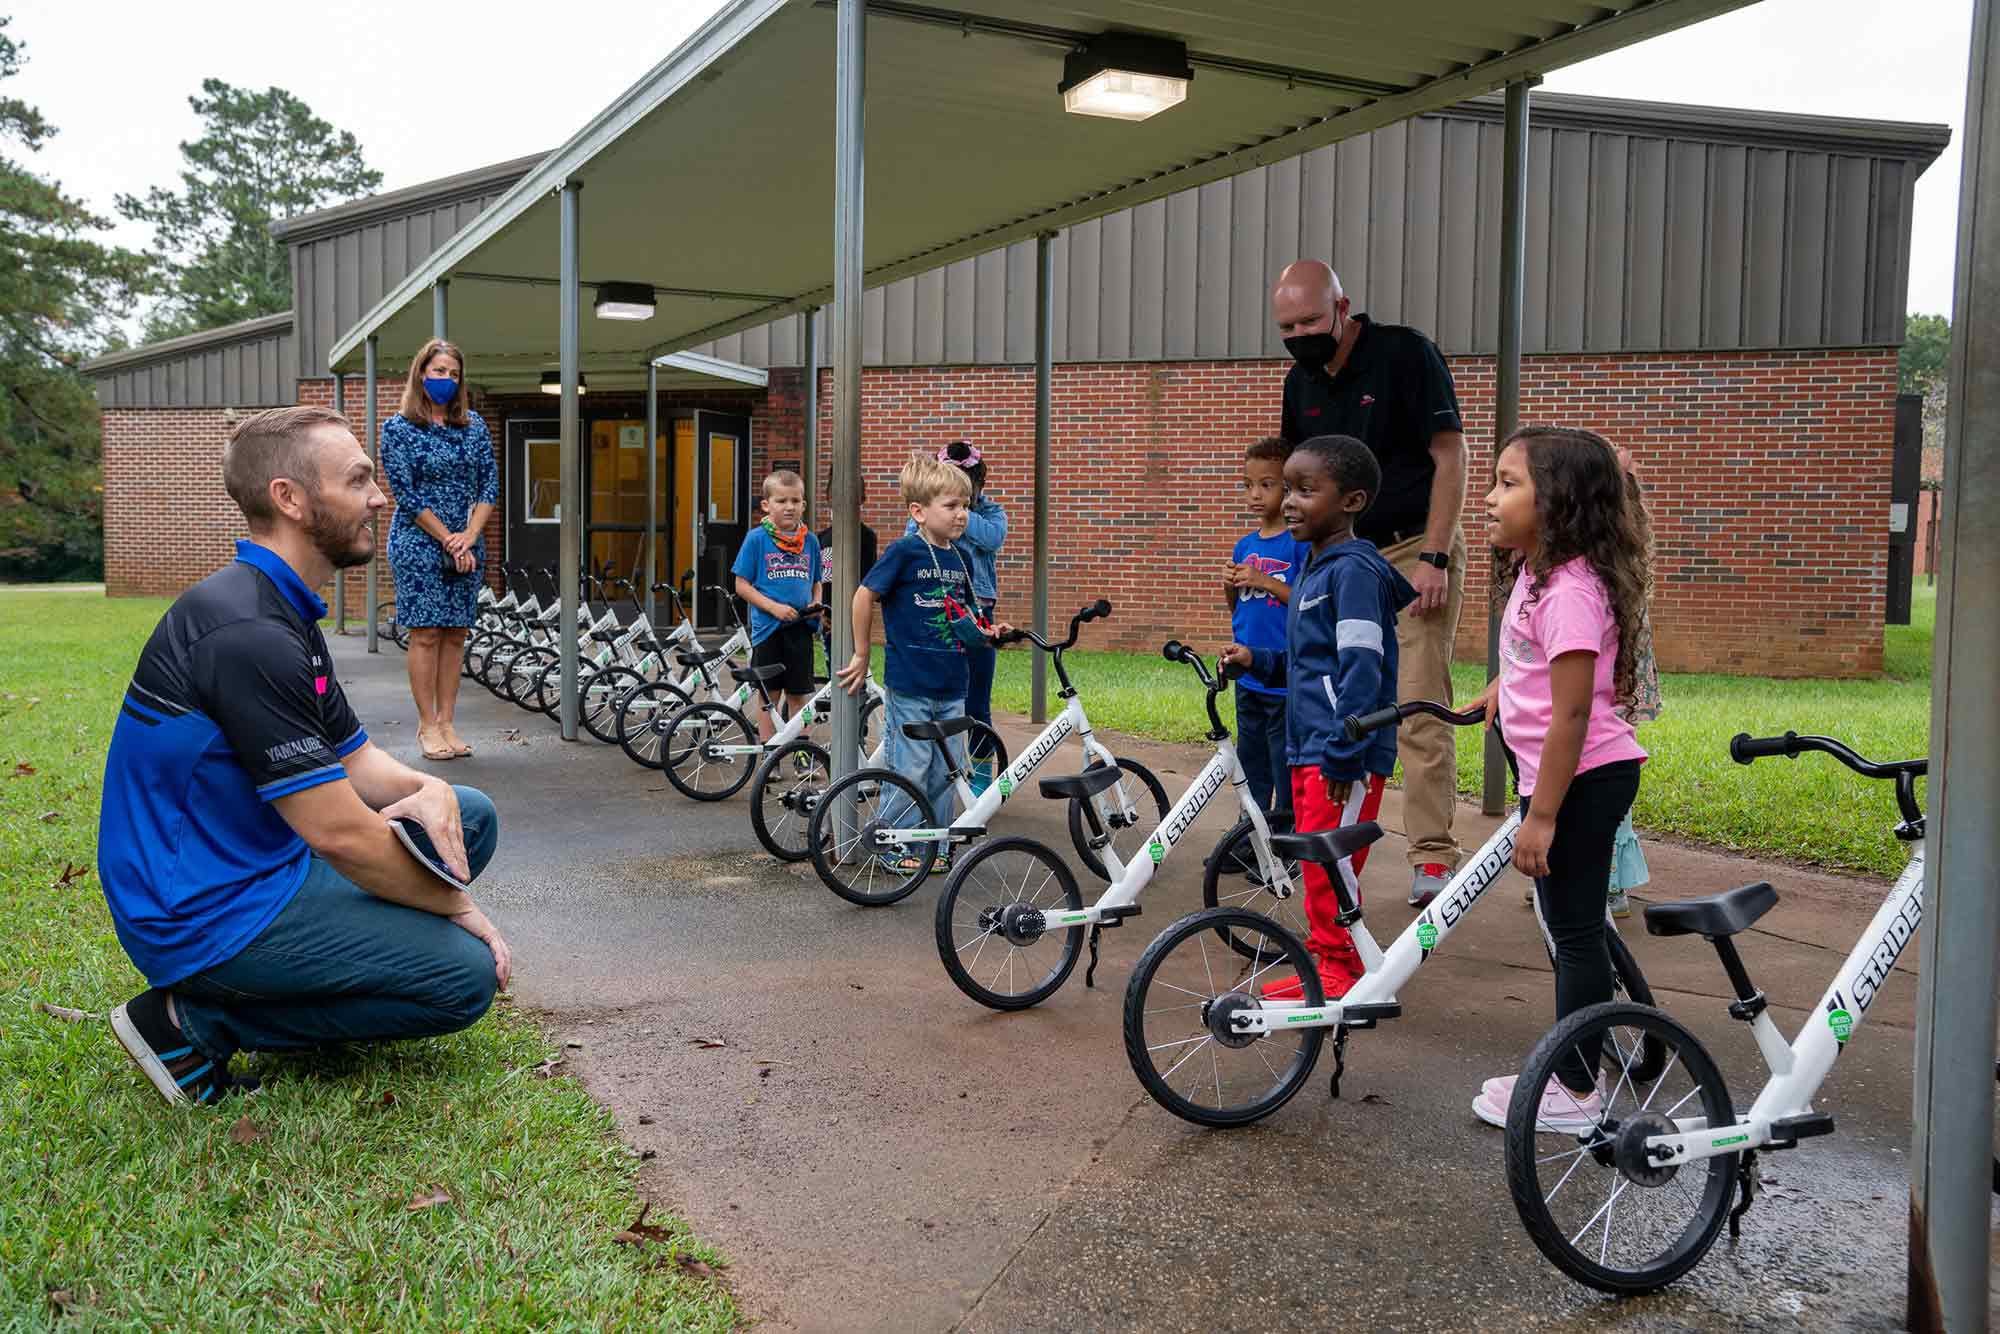 A $10 donation to All Kids Bike ensures that one kid will learn to ride.